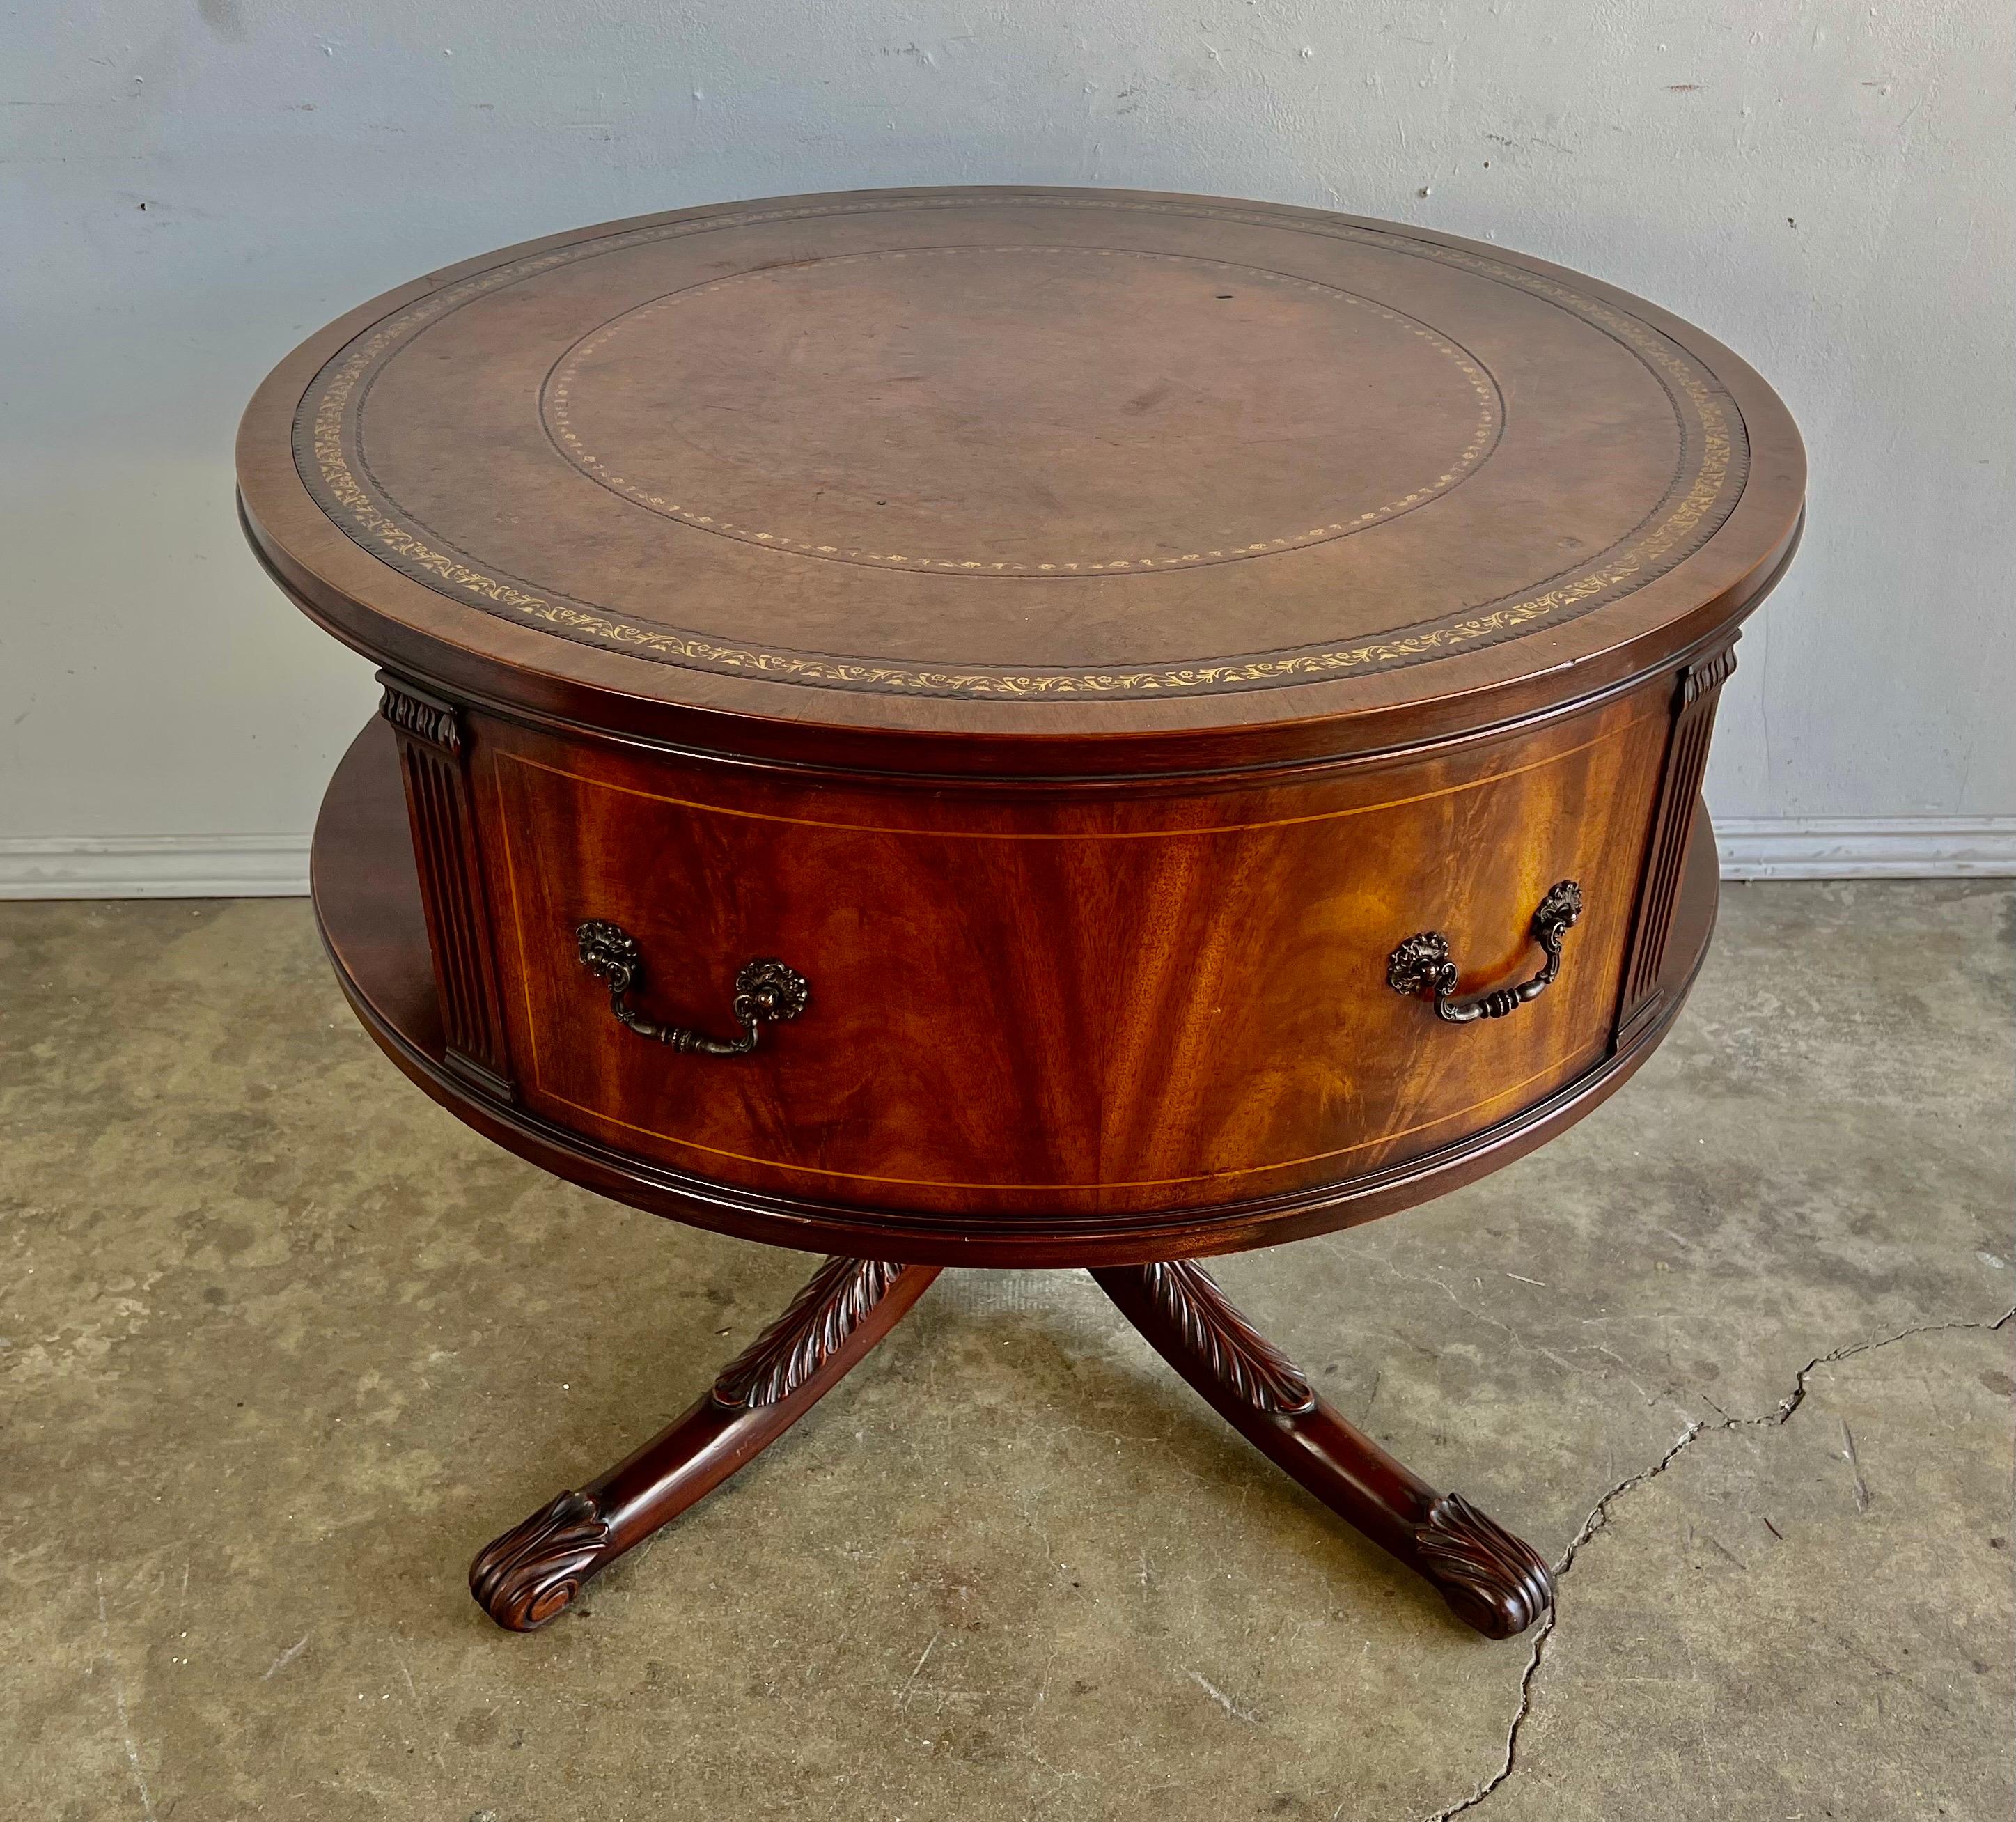 English leather top Drum table that stands on a four curved legs with carved acanthus leaf detail. The brown leather on the top is beautifully gold embossed around the edge of the top. The table is constructed with flame mahogany. The inside of the